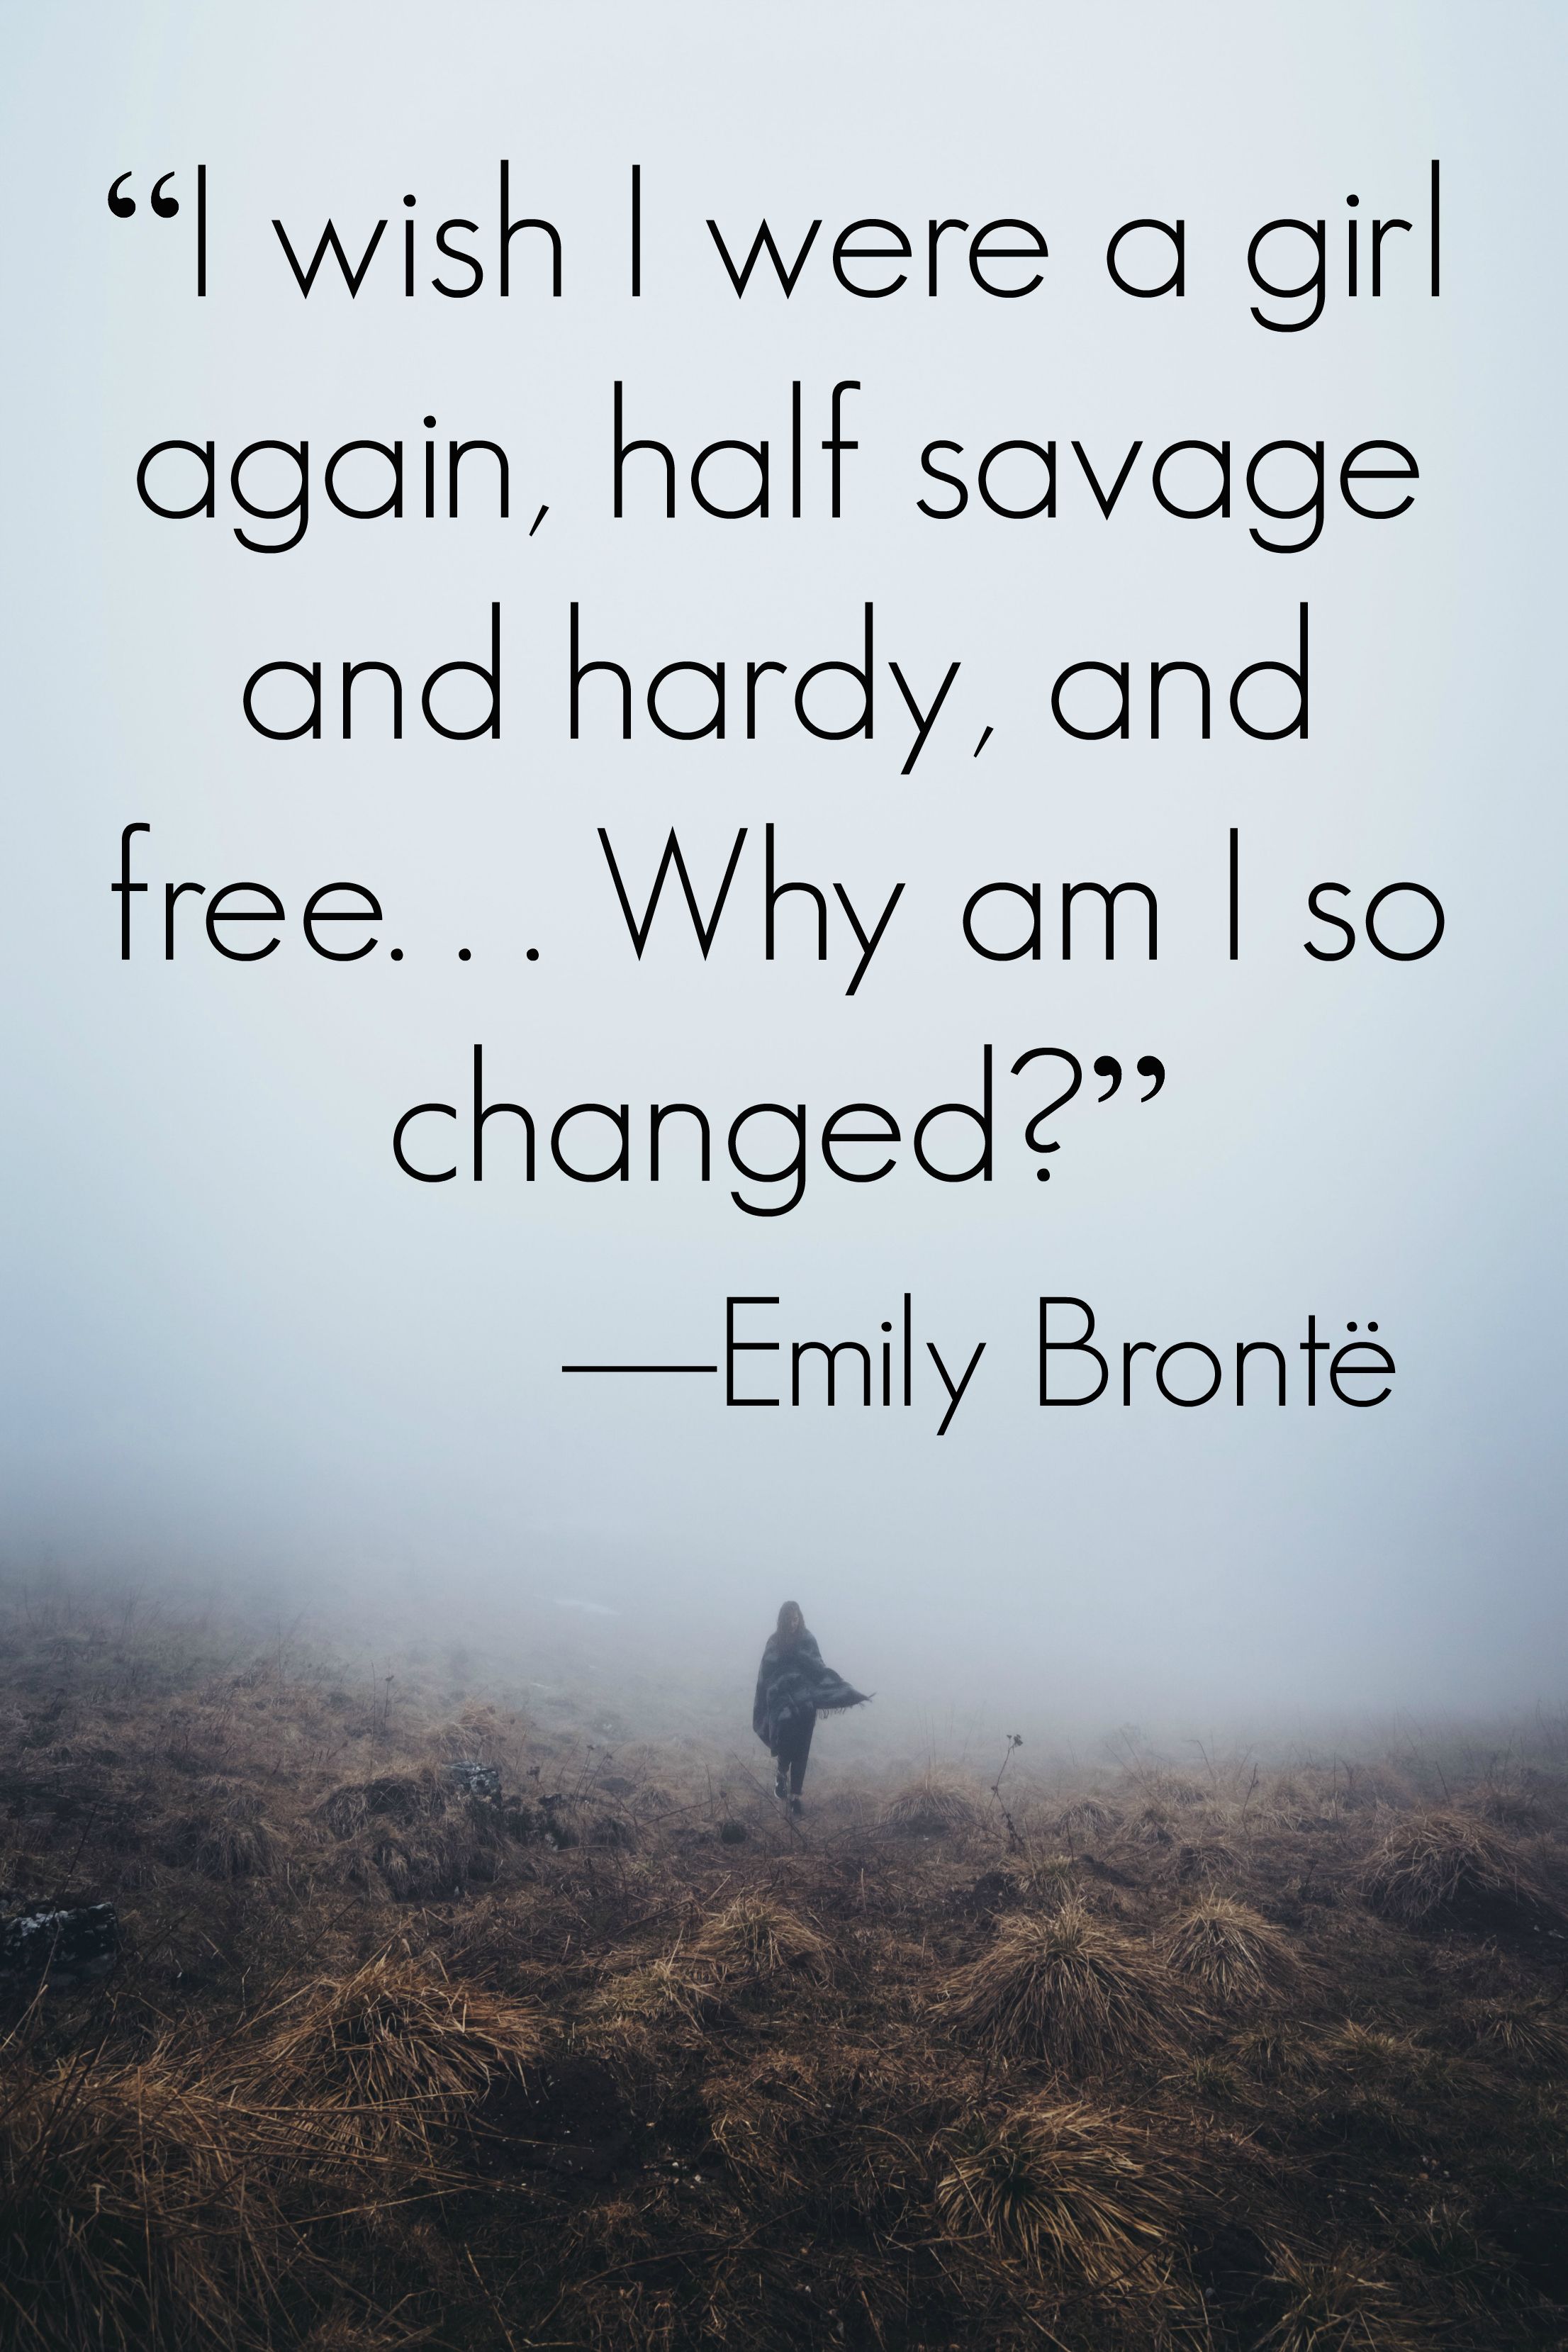 Bronte Quotes "I wish I were a girl again, half savage and hardy, and free . . . Why am I so changed? Emily Bronte